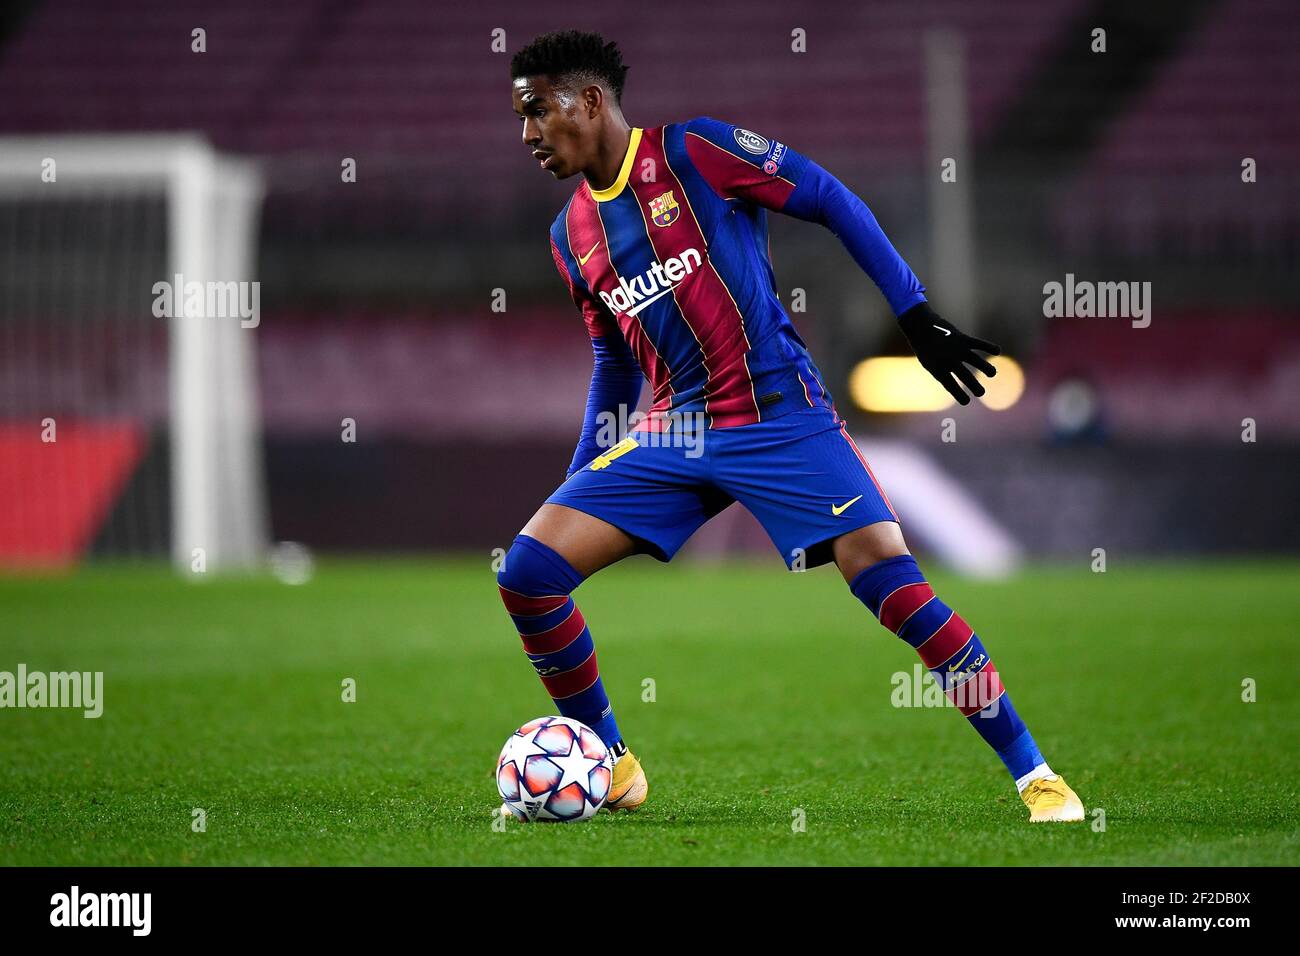 Barcelona, Spain - 08 December, 2020: Junior Firpo of FC Barcelona in action during the UEFA Champions League Group G football match between FC Barcelona and Juventus. Juventus FC won 3-0 over FC Barcelona. Credit: Nicolò Campo/Alamy Live News Stock Photo